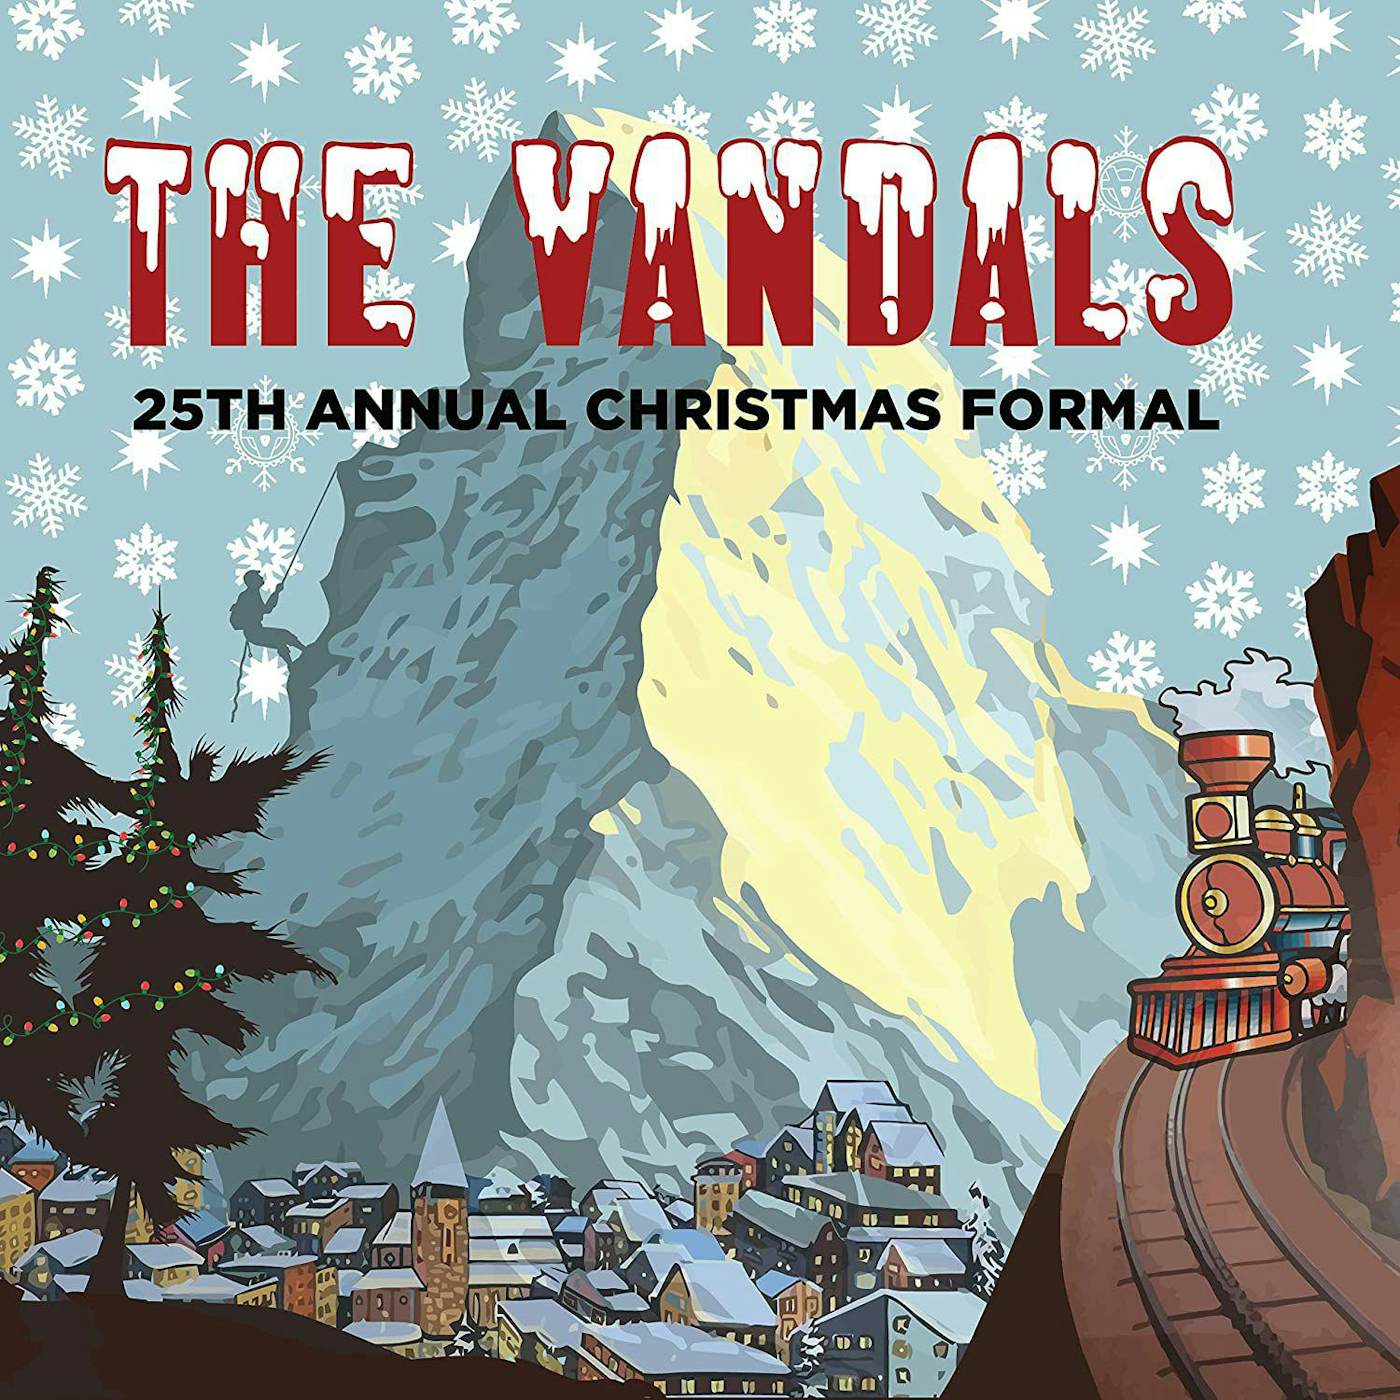 The Vandals  25th Annual Christmas Formal (Red & Black Marble) Vinyl Record